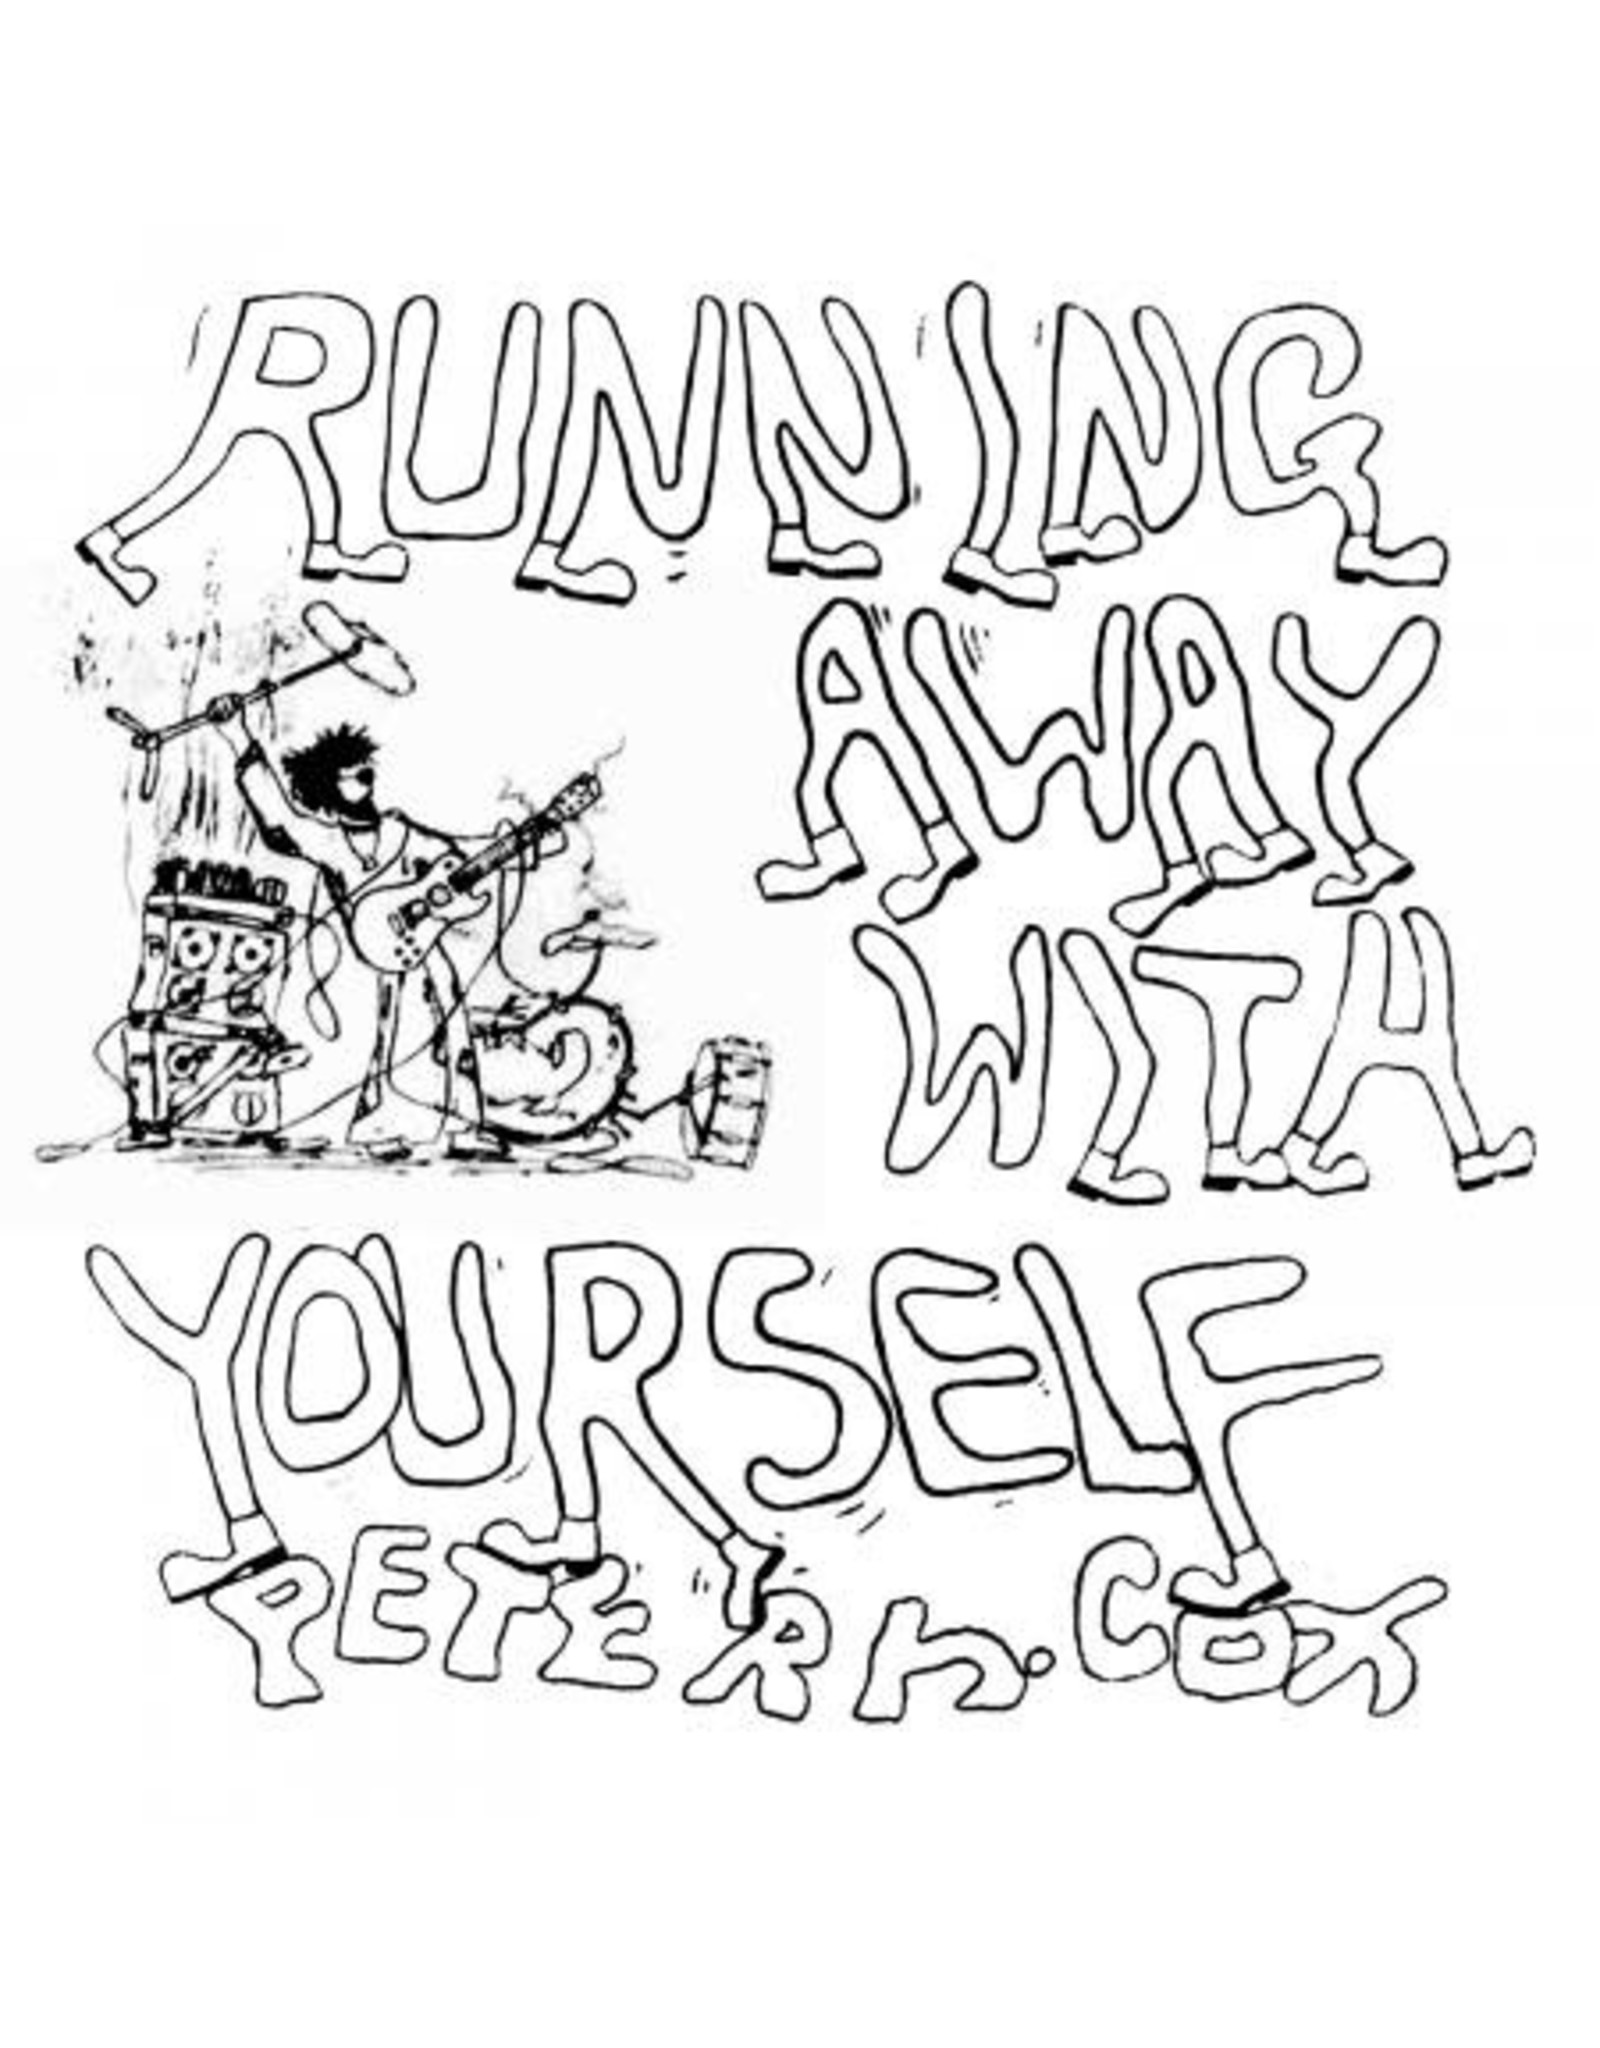 Dosh Cox, Peter J.: Running Away With Yourself LP